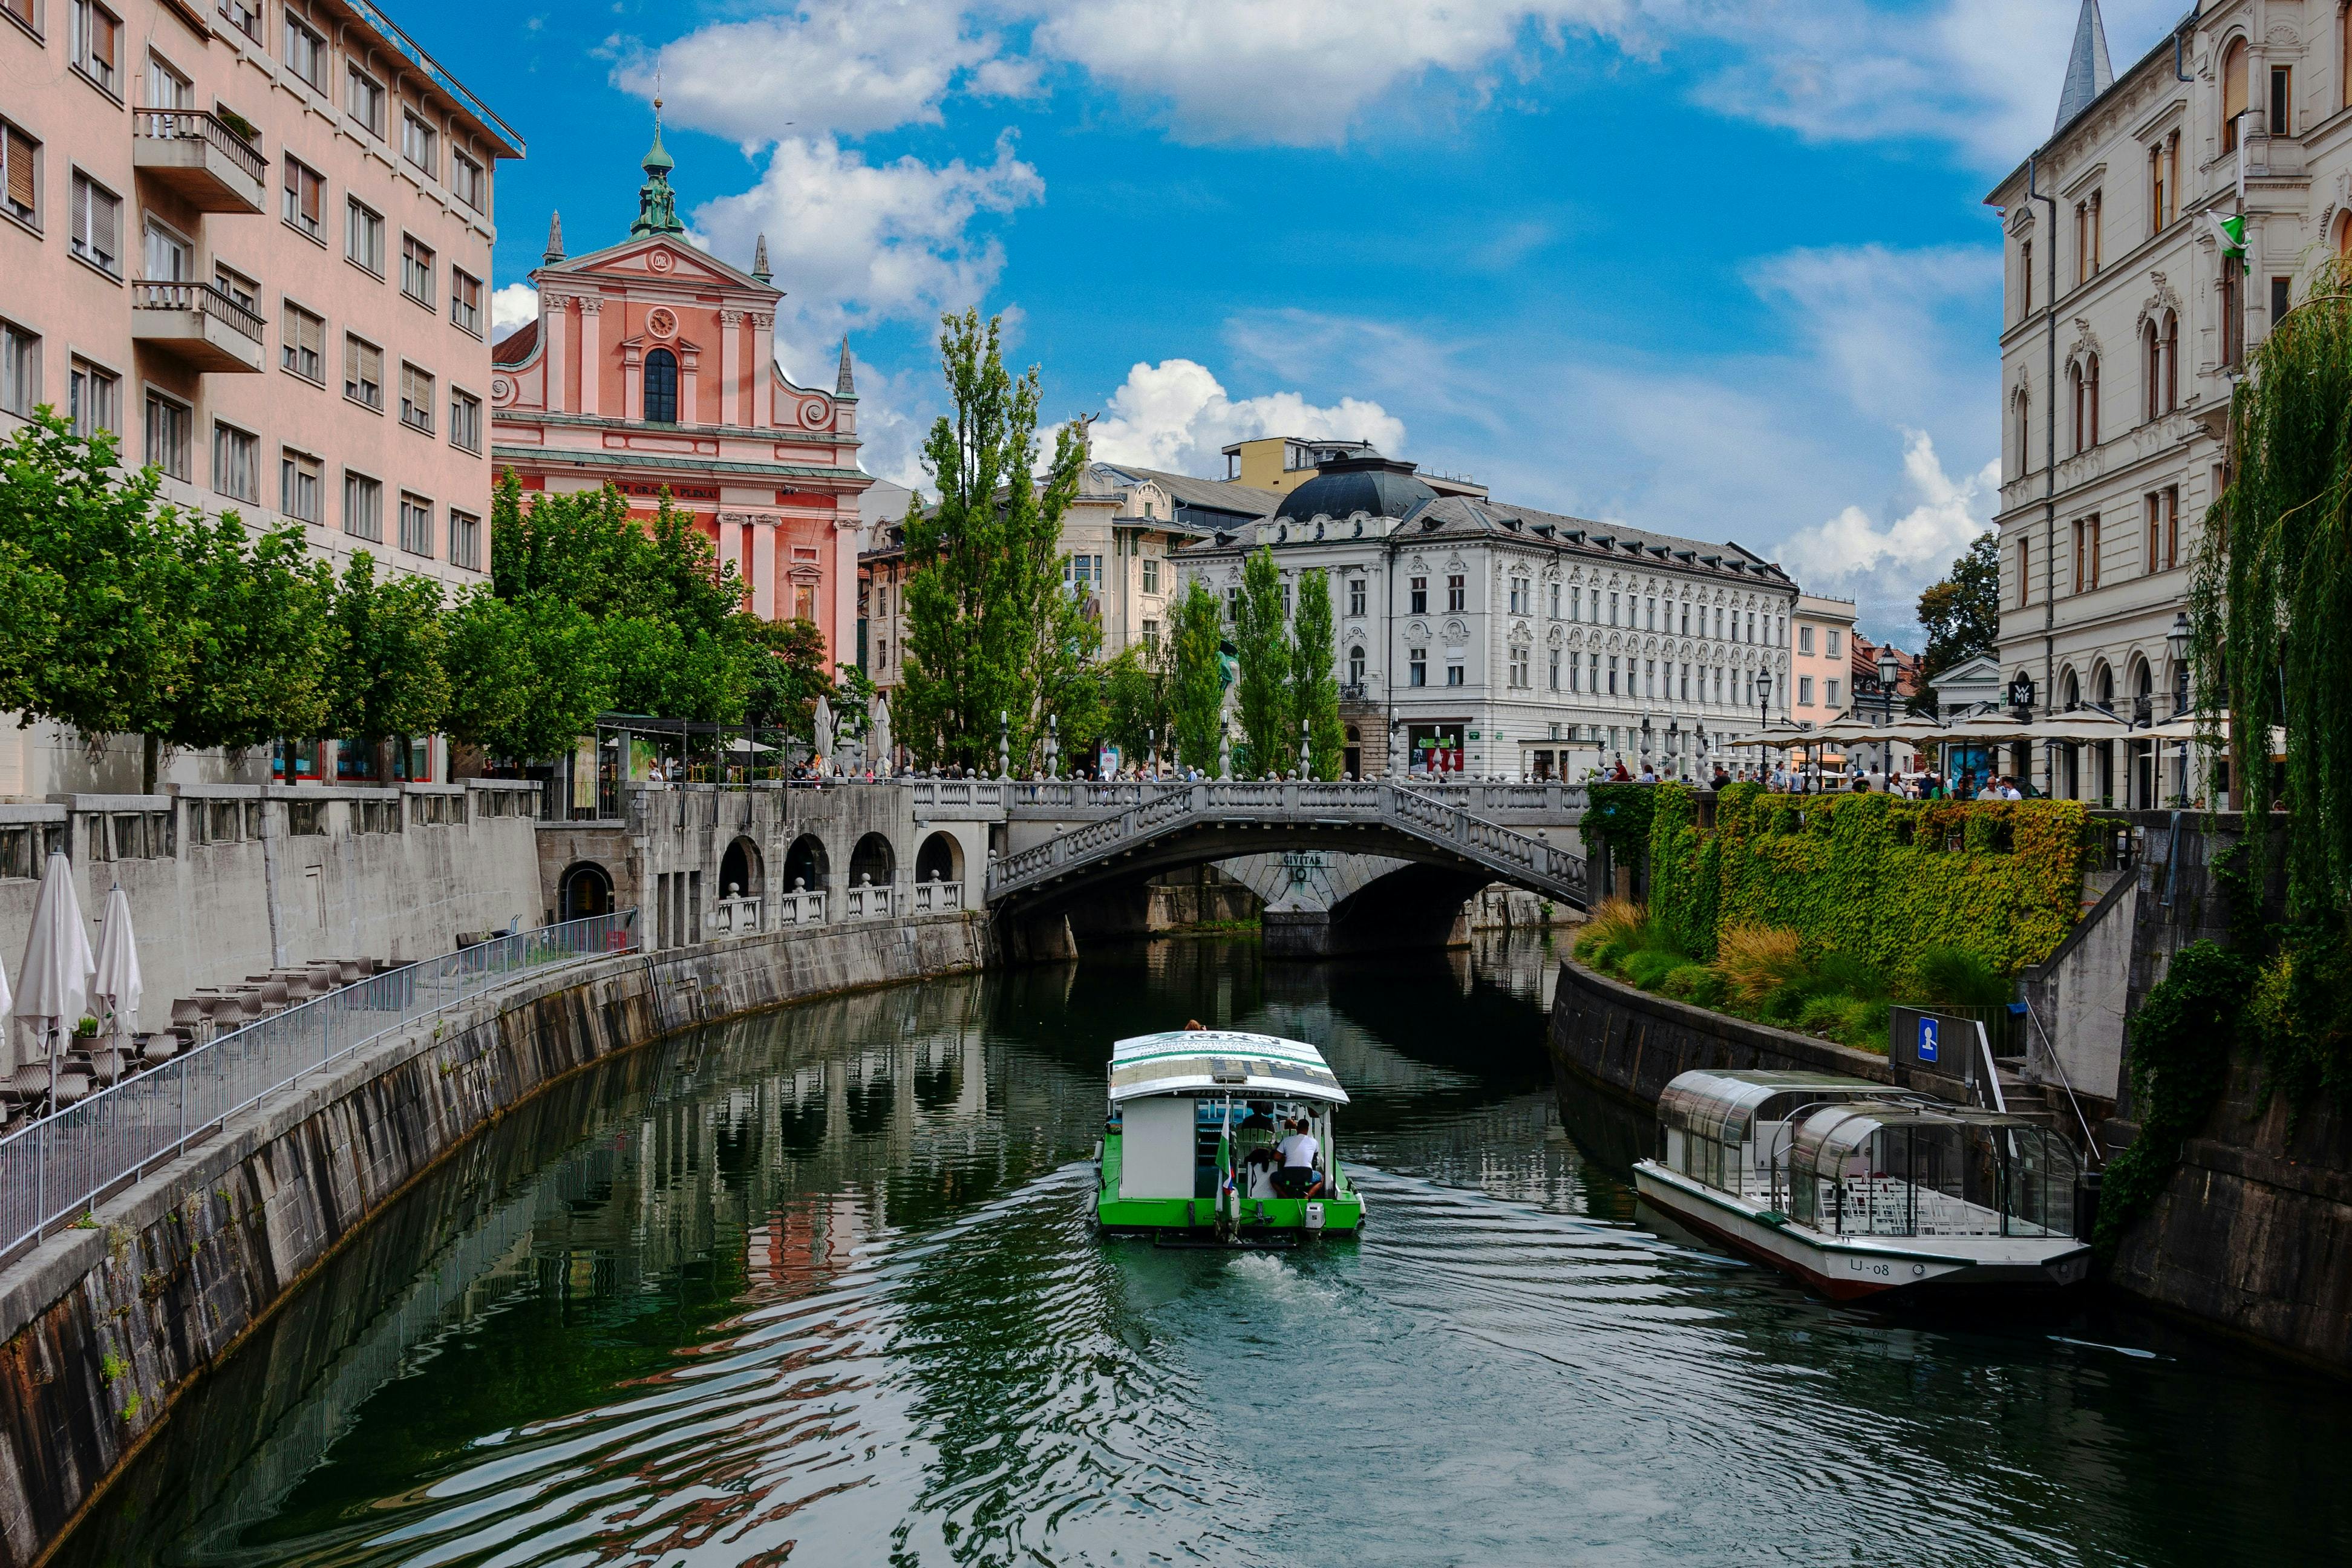 The instagrammable spots of Ljubljana with a local Musement